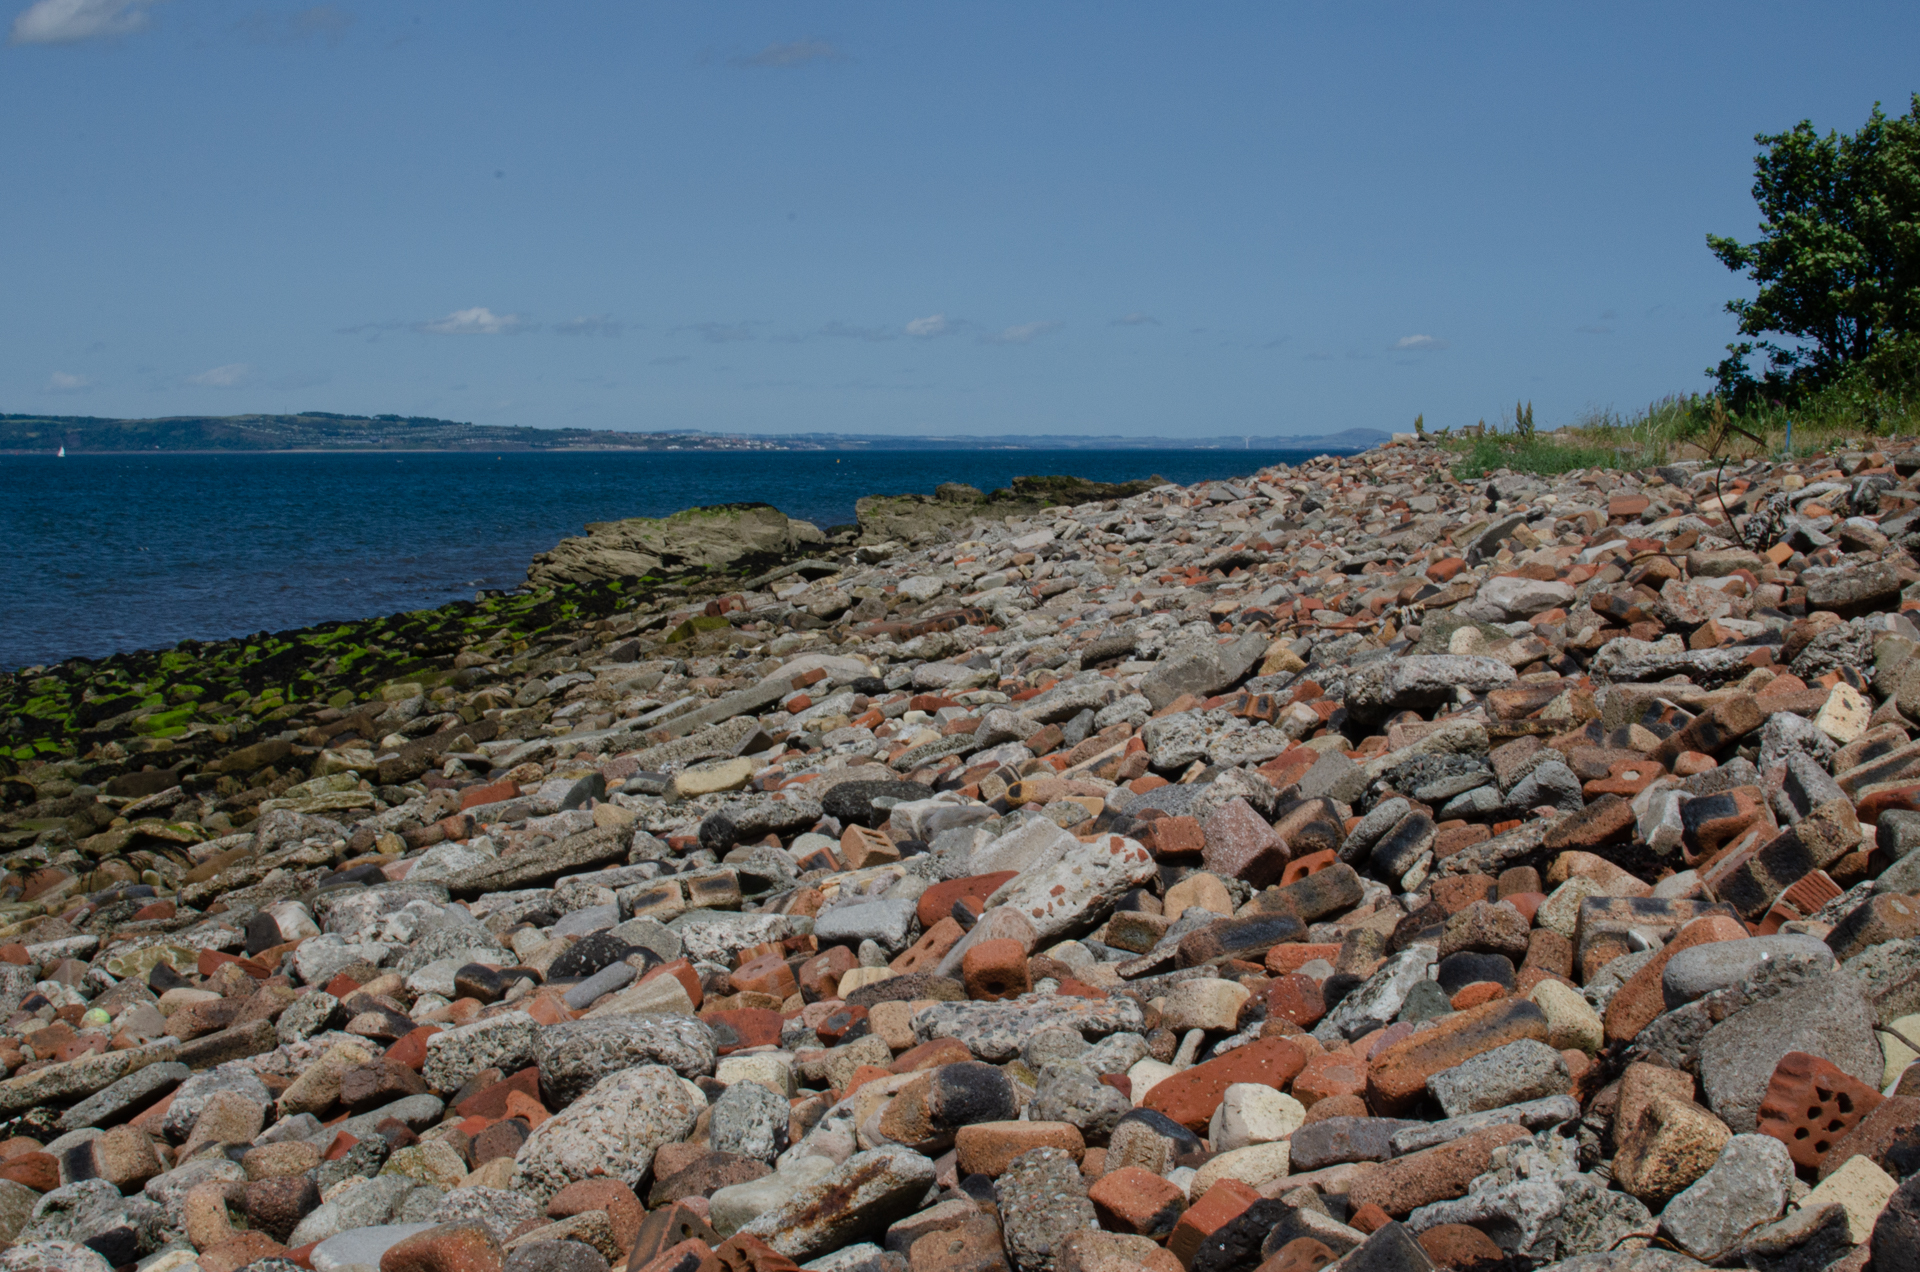 A view of Royston beach looking NE, towards the Firth of Forth. The fore and middle ground shows the slope of the beach with the sea at left, brick rubble covers everything. A large partially submerged rock formation can be seen in the distance and behind that, the Firth of Forth and a portion of Fife. The sky is blue and cloudless.